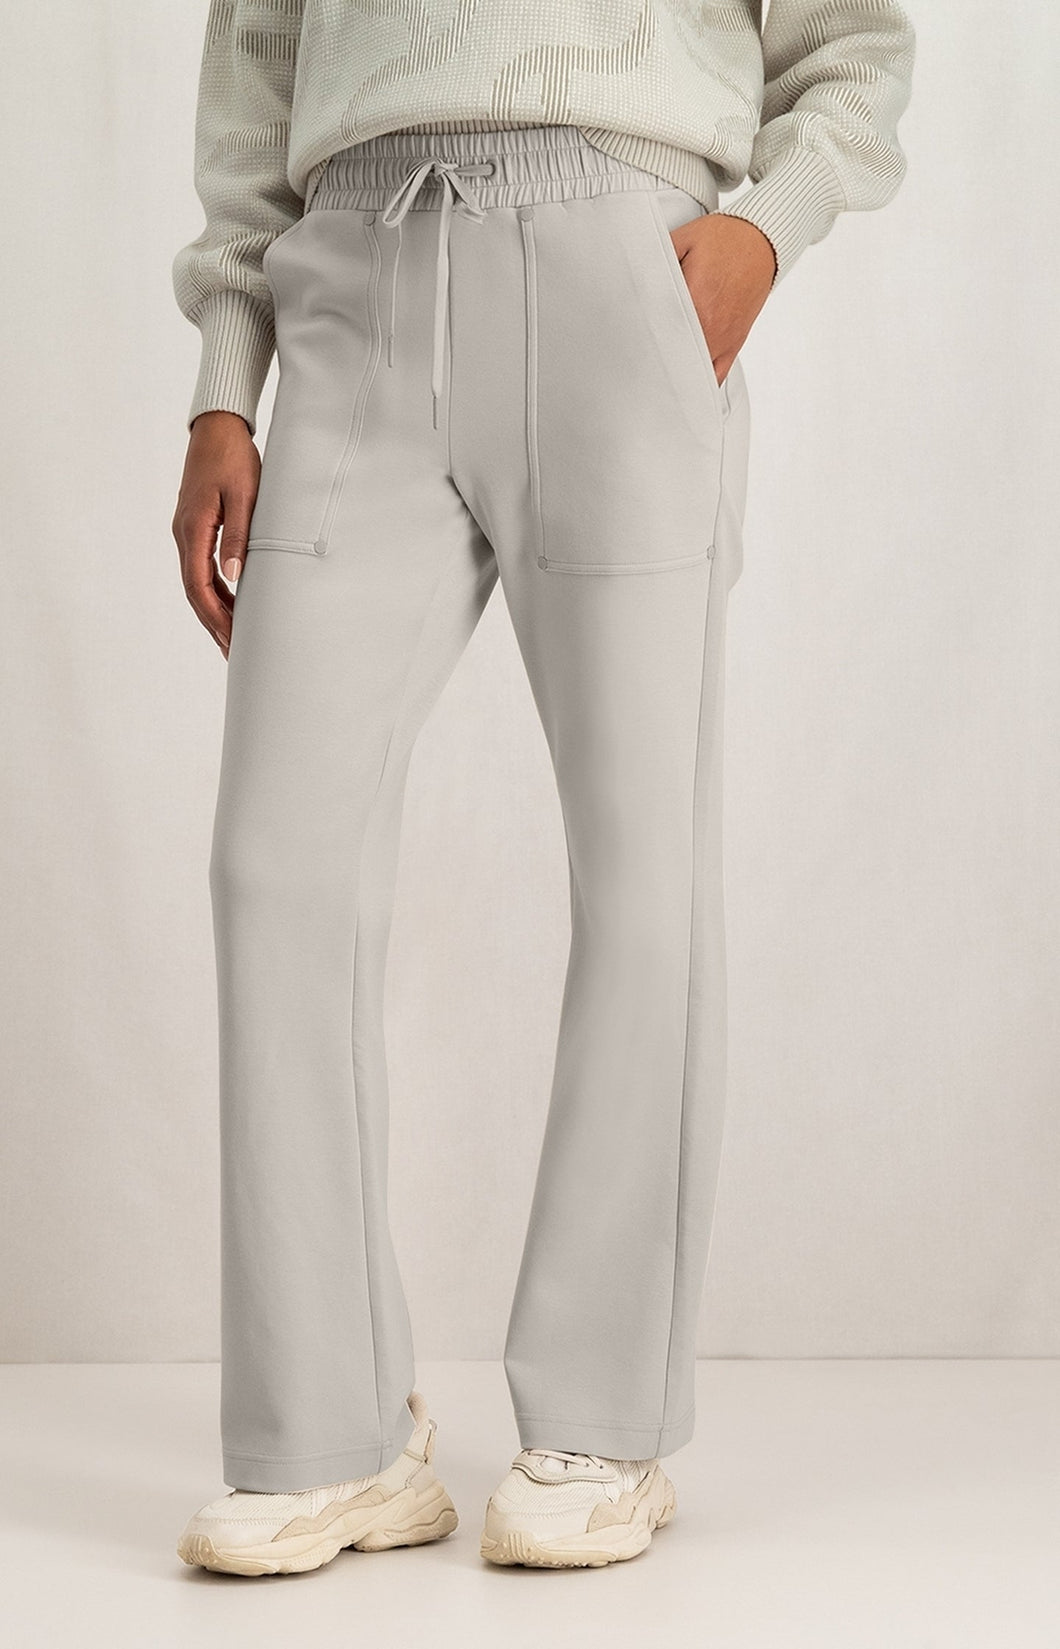 Jersey scuba trousers with flared leg, drawstring and pocket - Silver Lining Beige - Type: closeup